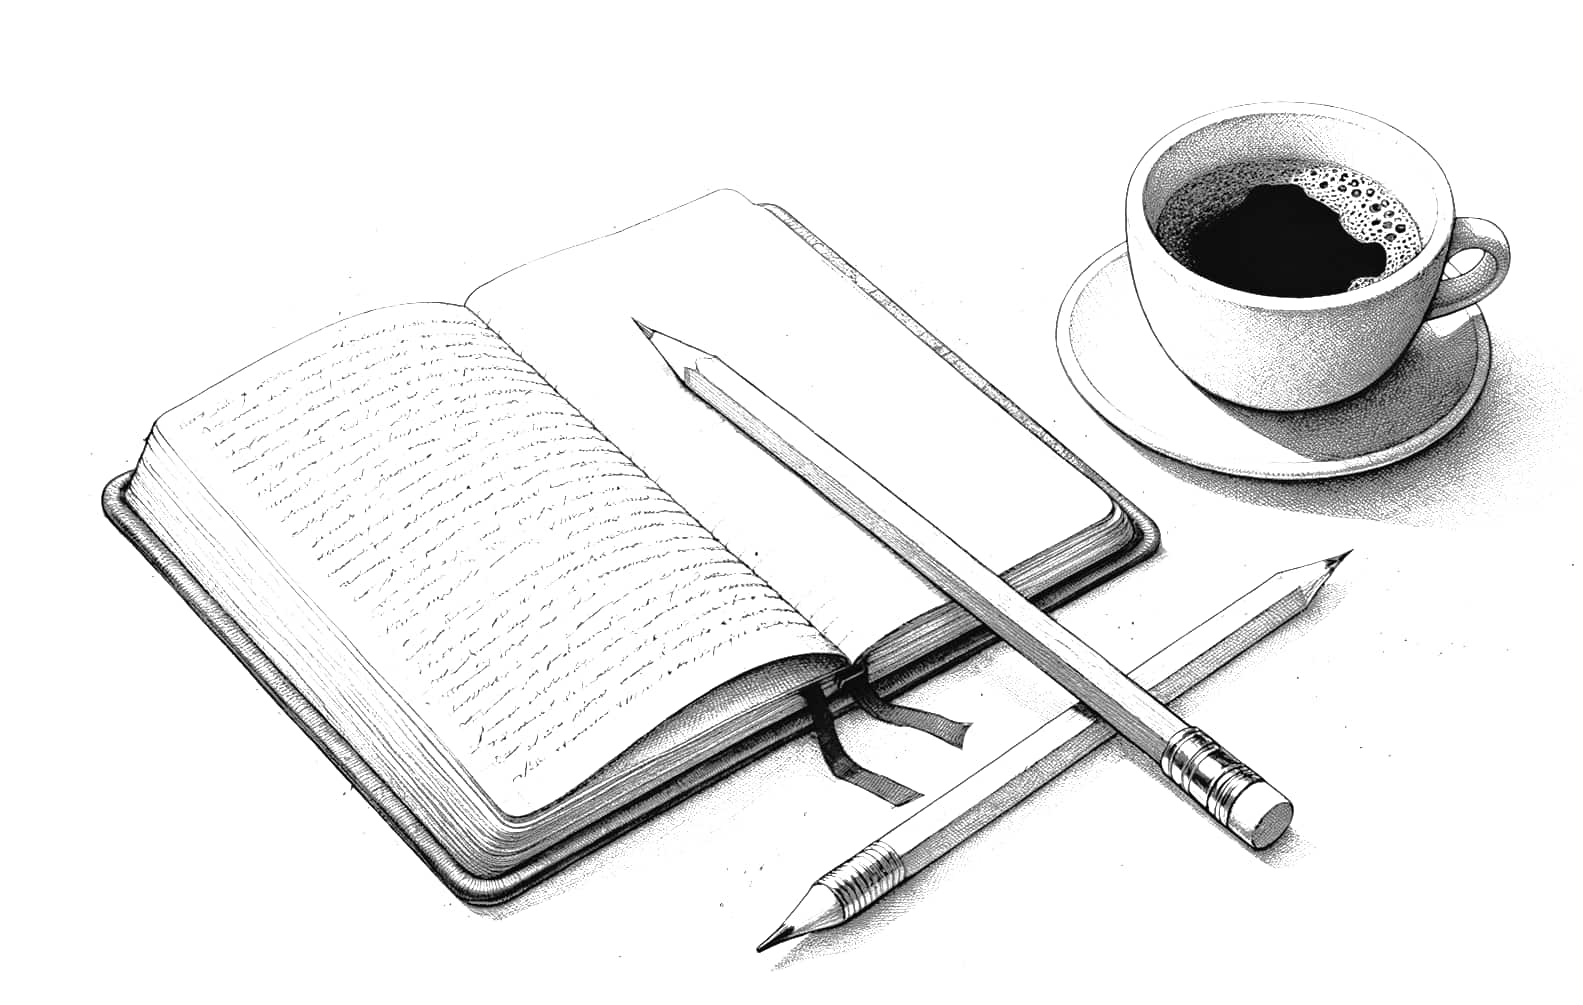 The image of a journal on the table